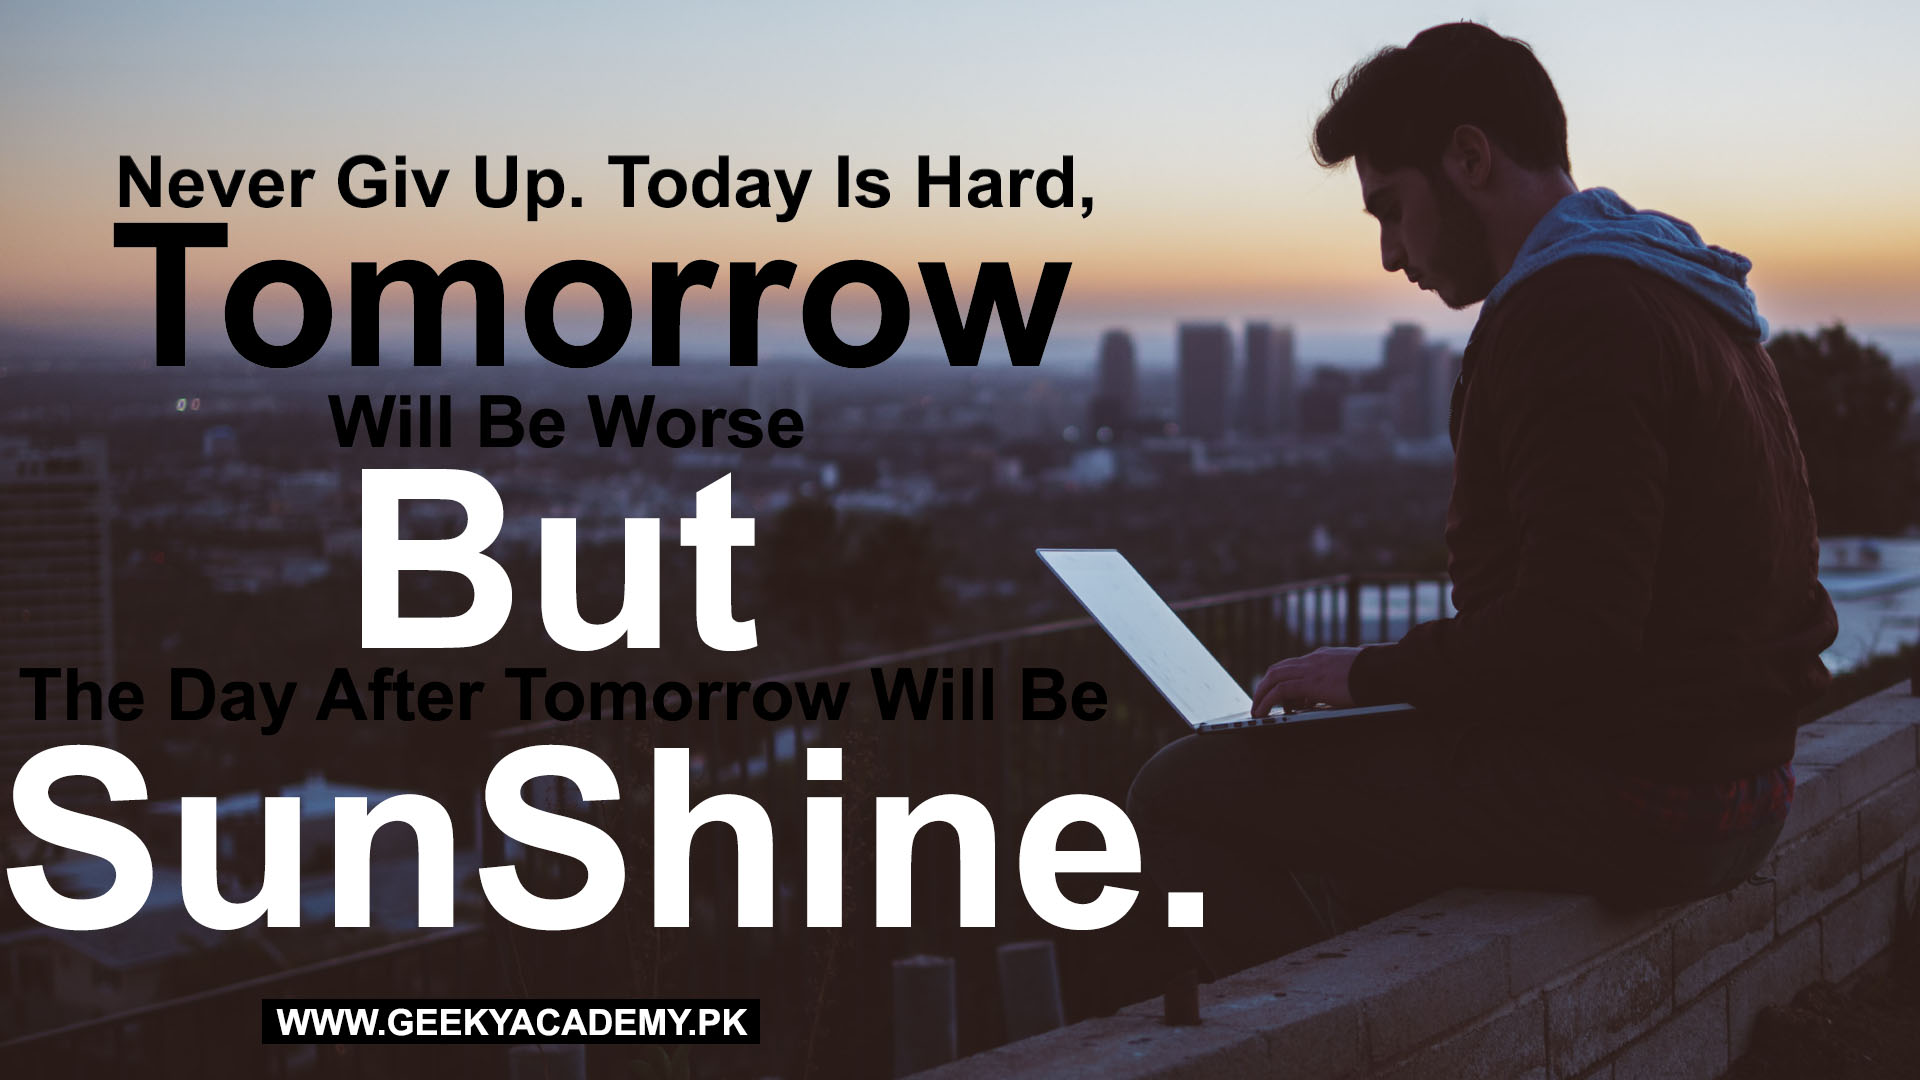 motivational quotes - Never Give Up. Today Is Hard, Tomorrow Will Be Worse But The Day After Tomorrow Will Be Sunshine.